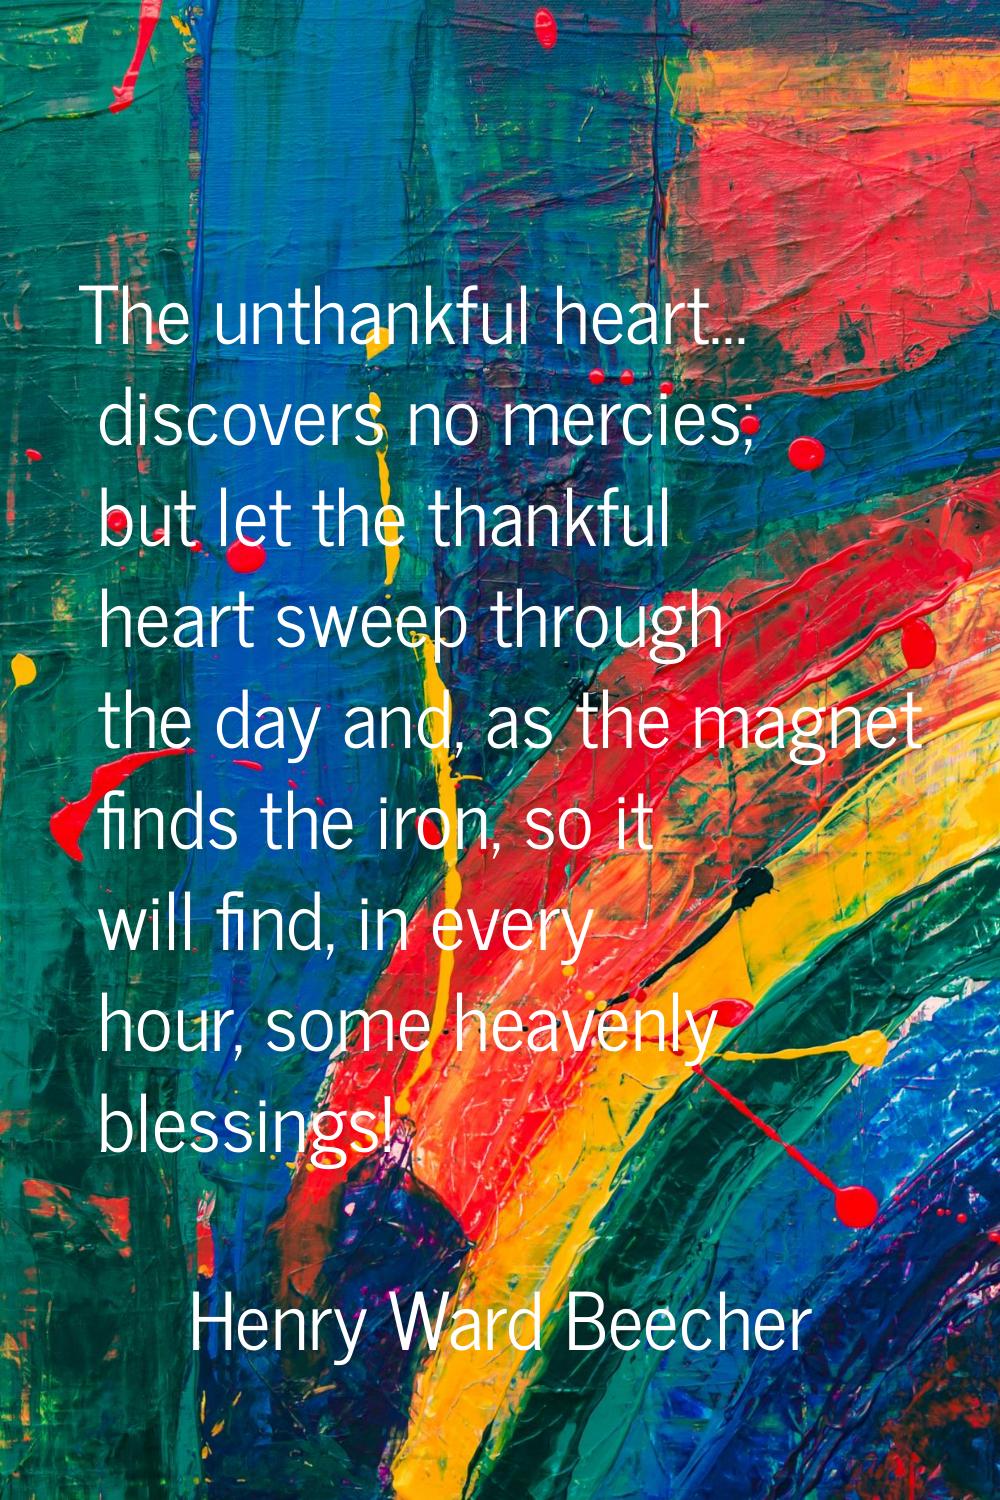 The unthankful heart... discovers no mercies; but let the thankful heart sweep through the day and,